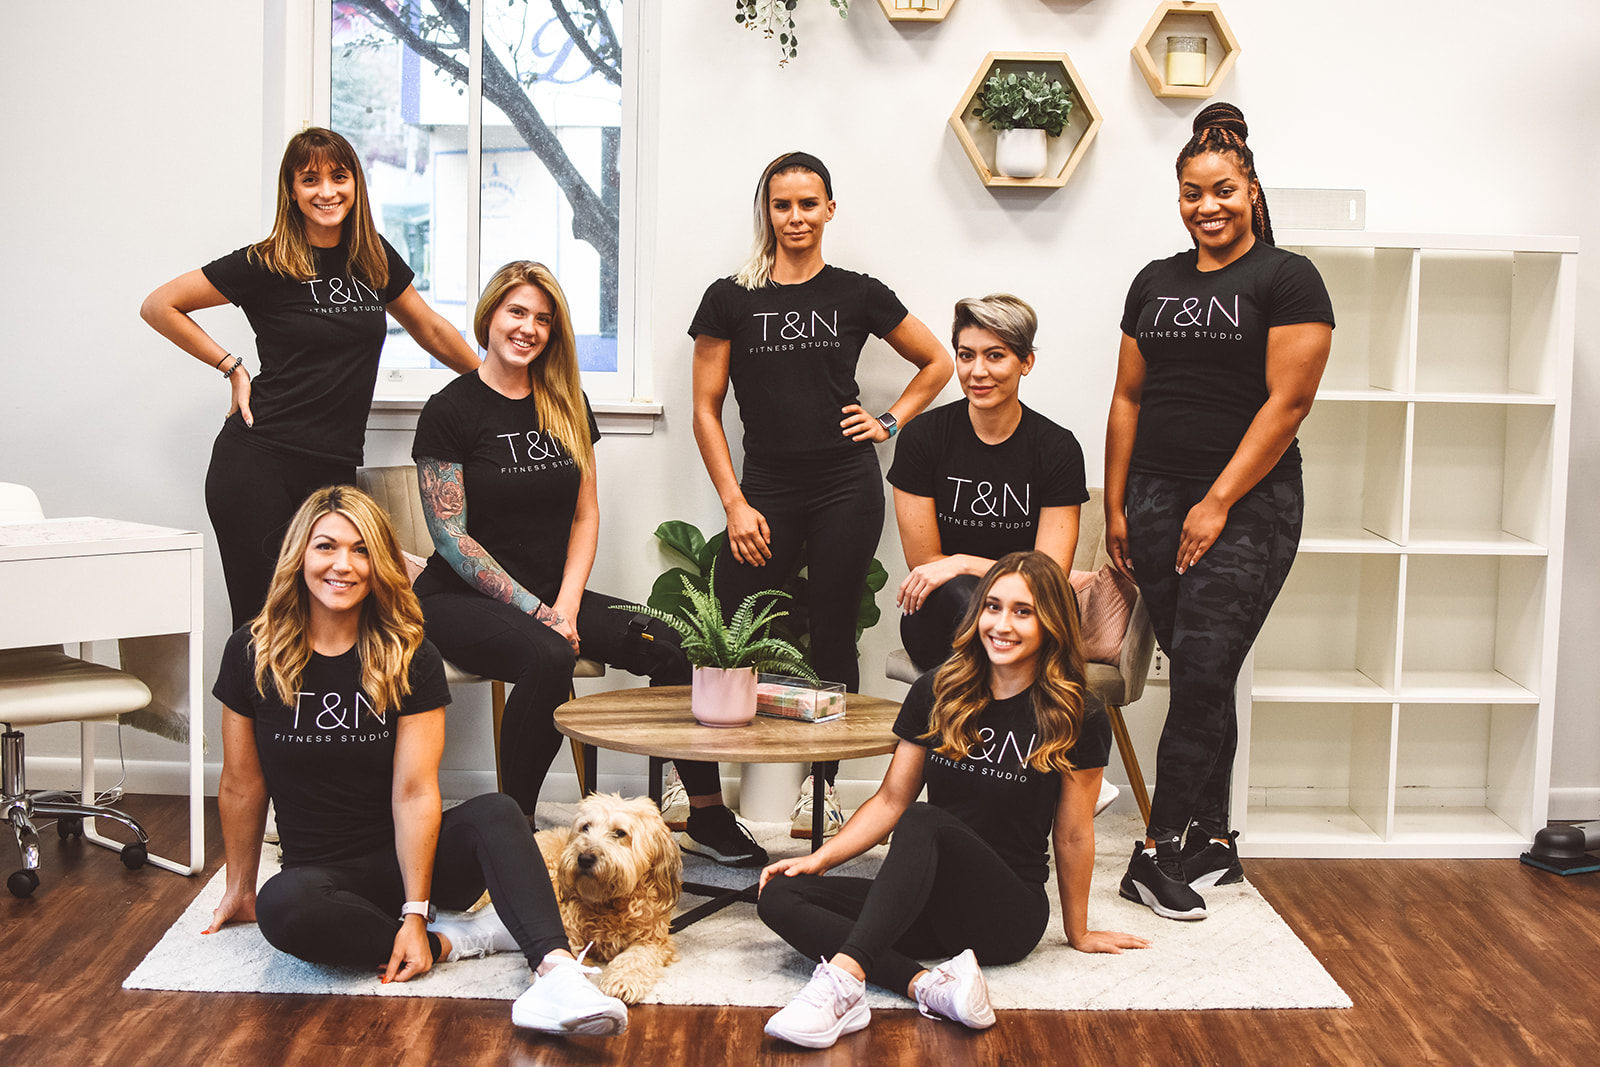 Find a group of women posing with a dog while wearing black t-shirts.